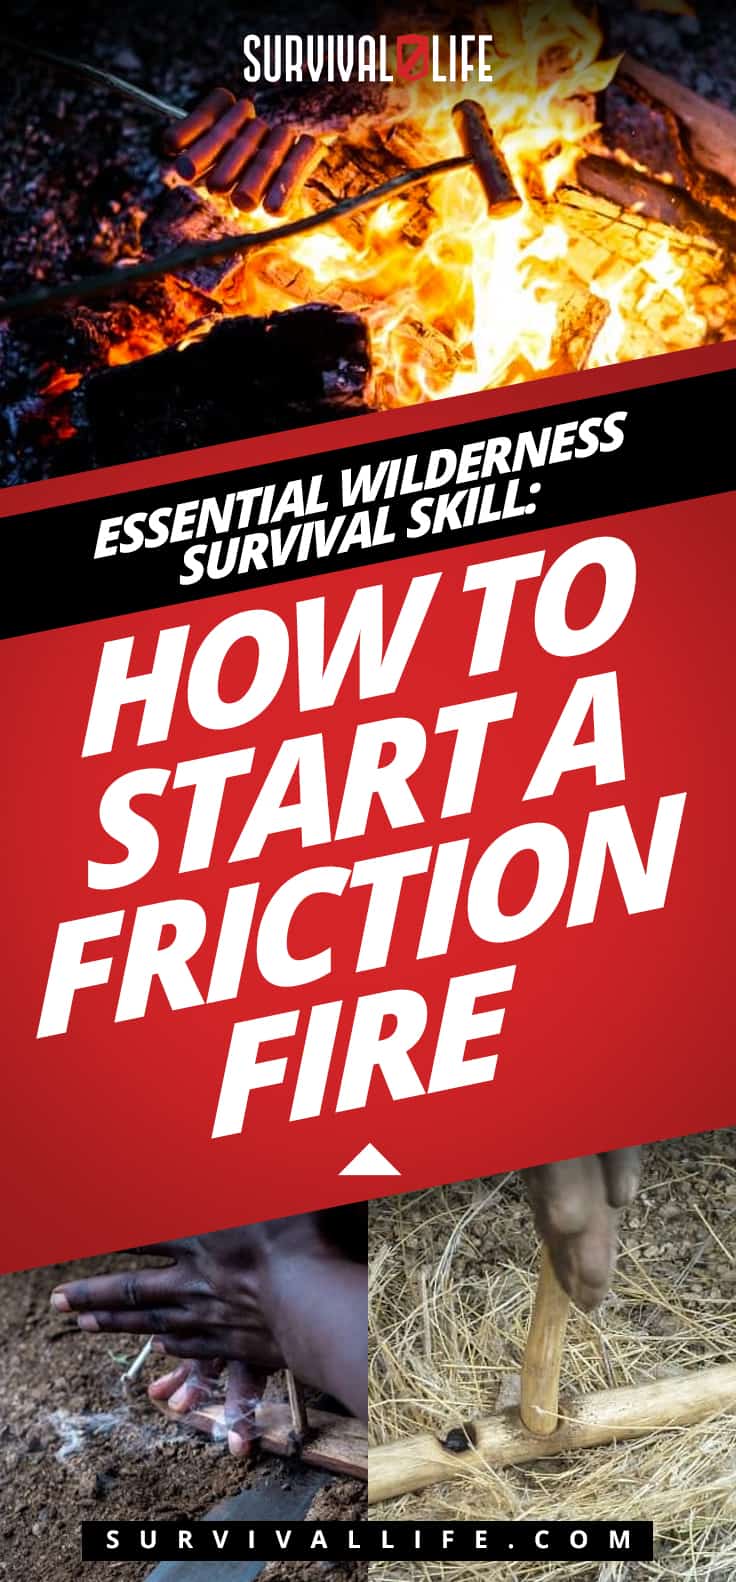 Essential Wilderness Survival Skill: How to Start a Friction Fire